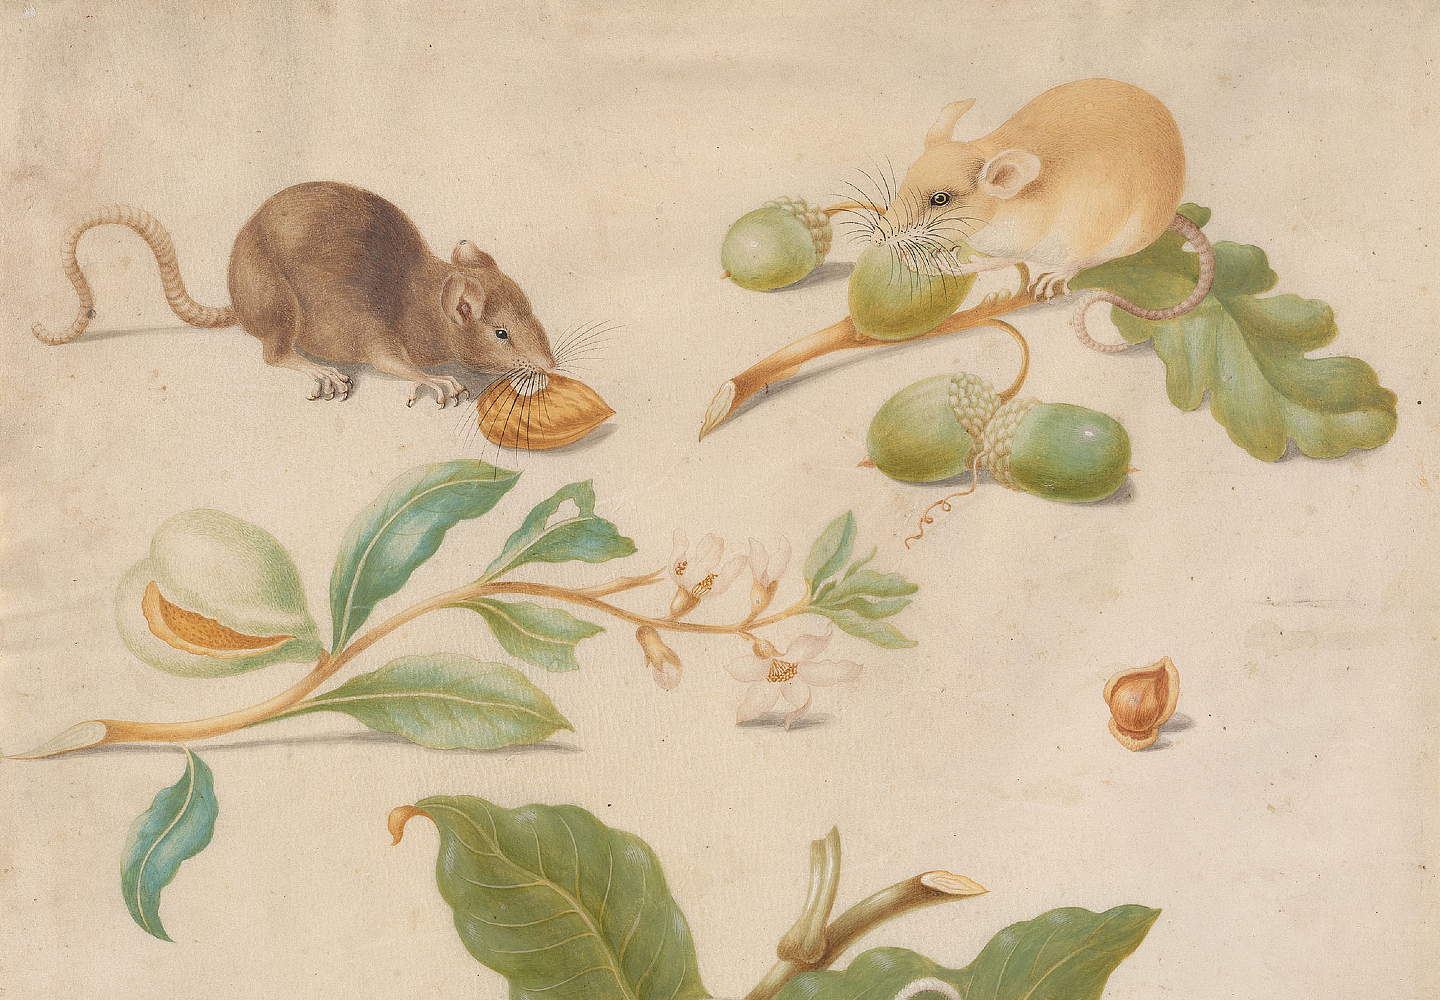 In Her Garden: Women Artists and Patrons in the Natural Sciences, 1650 – 1800